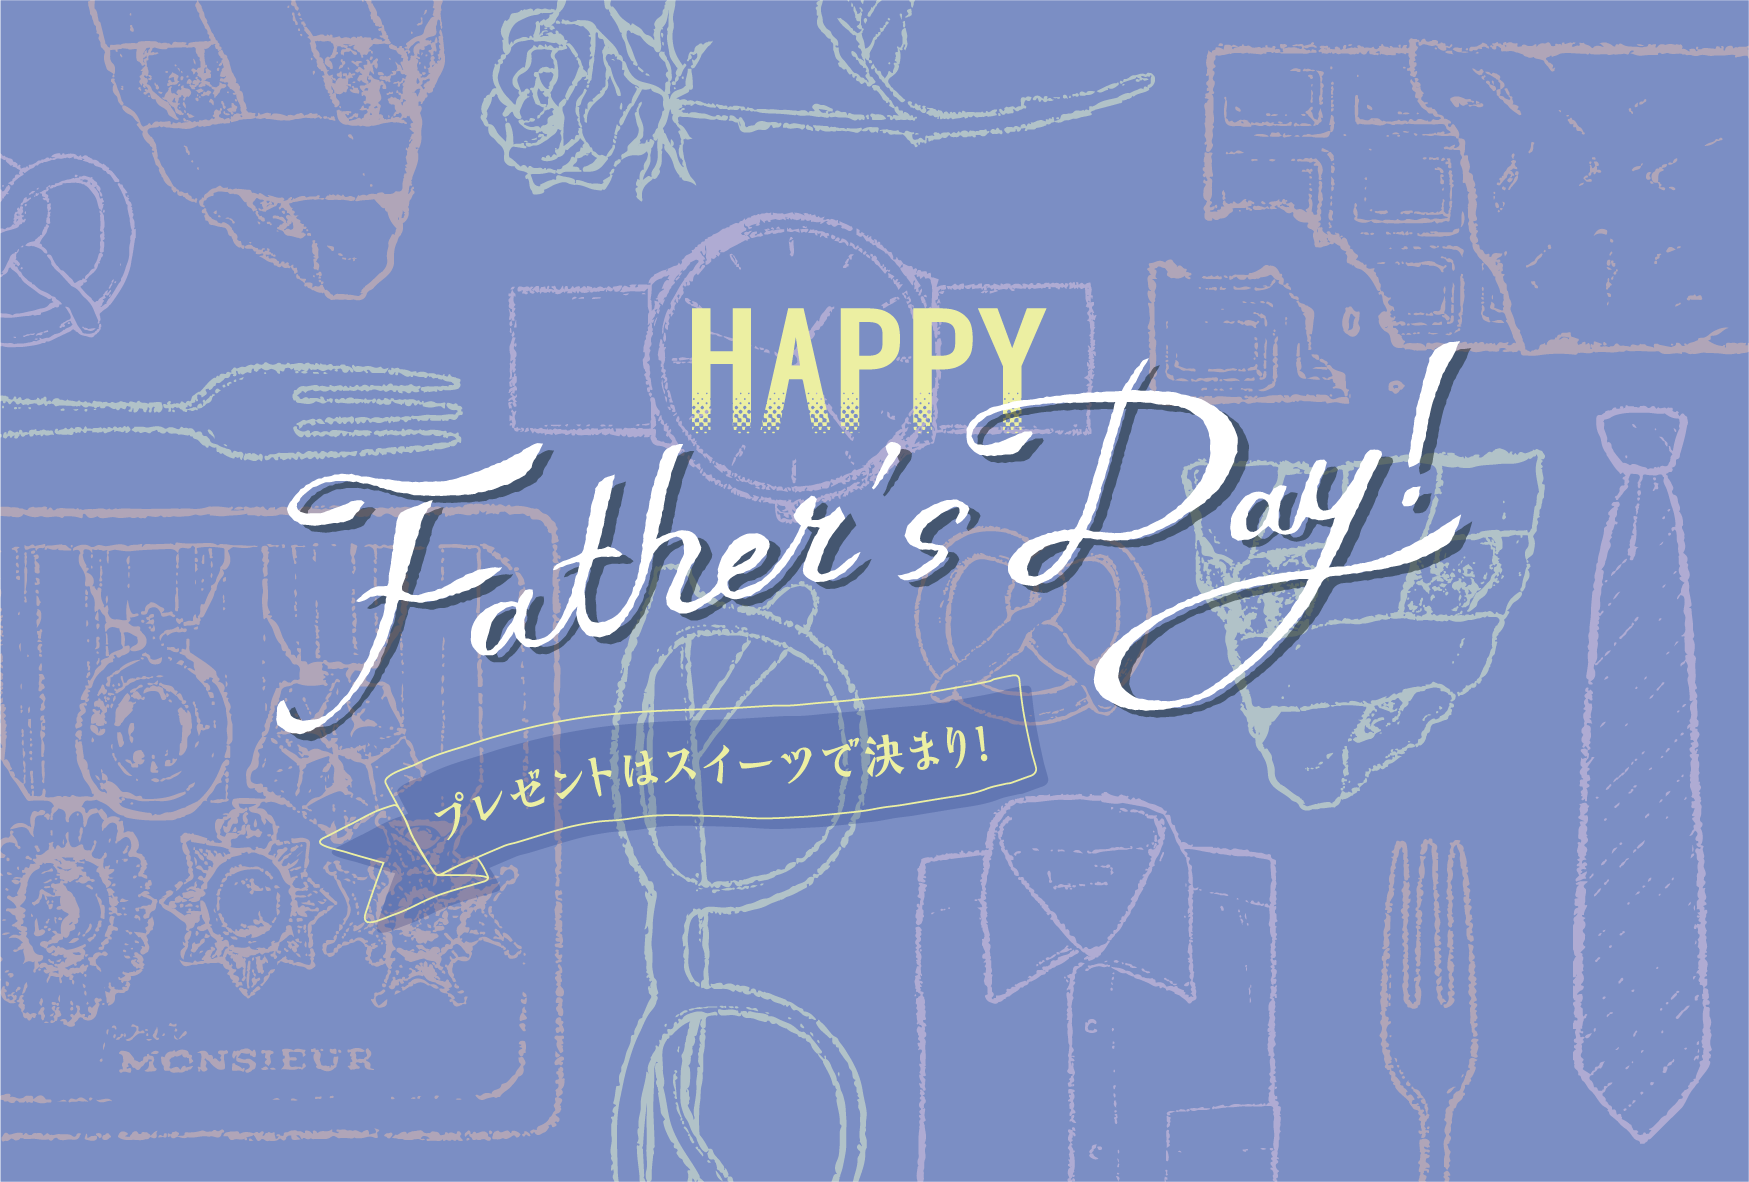 HAPPY Father’s Day!